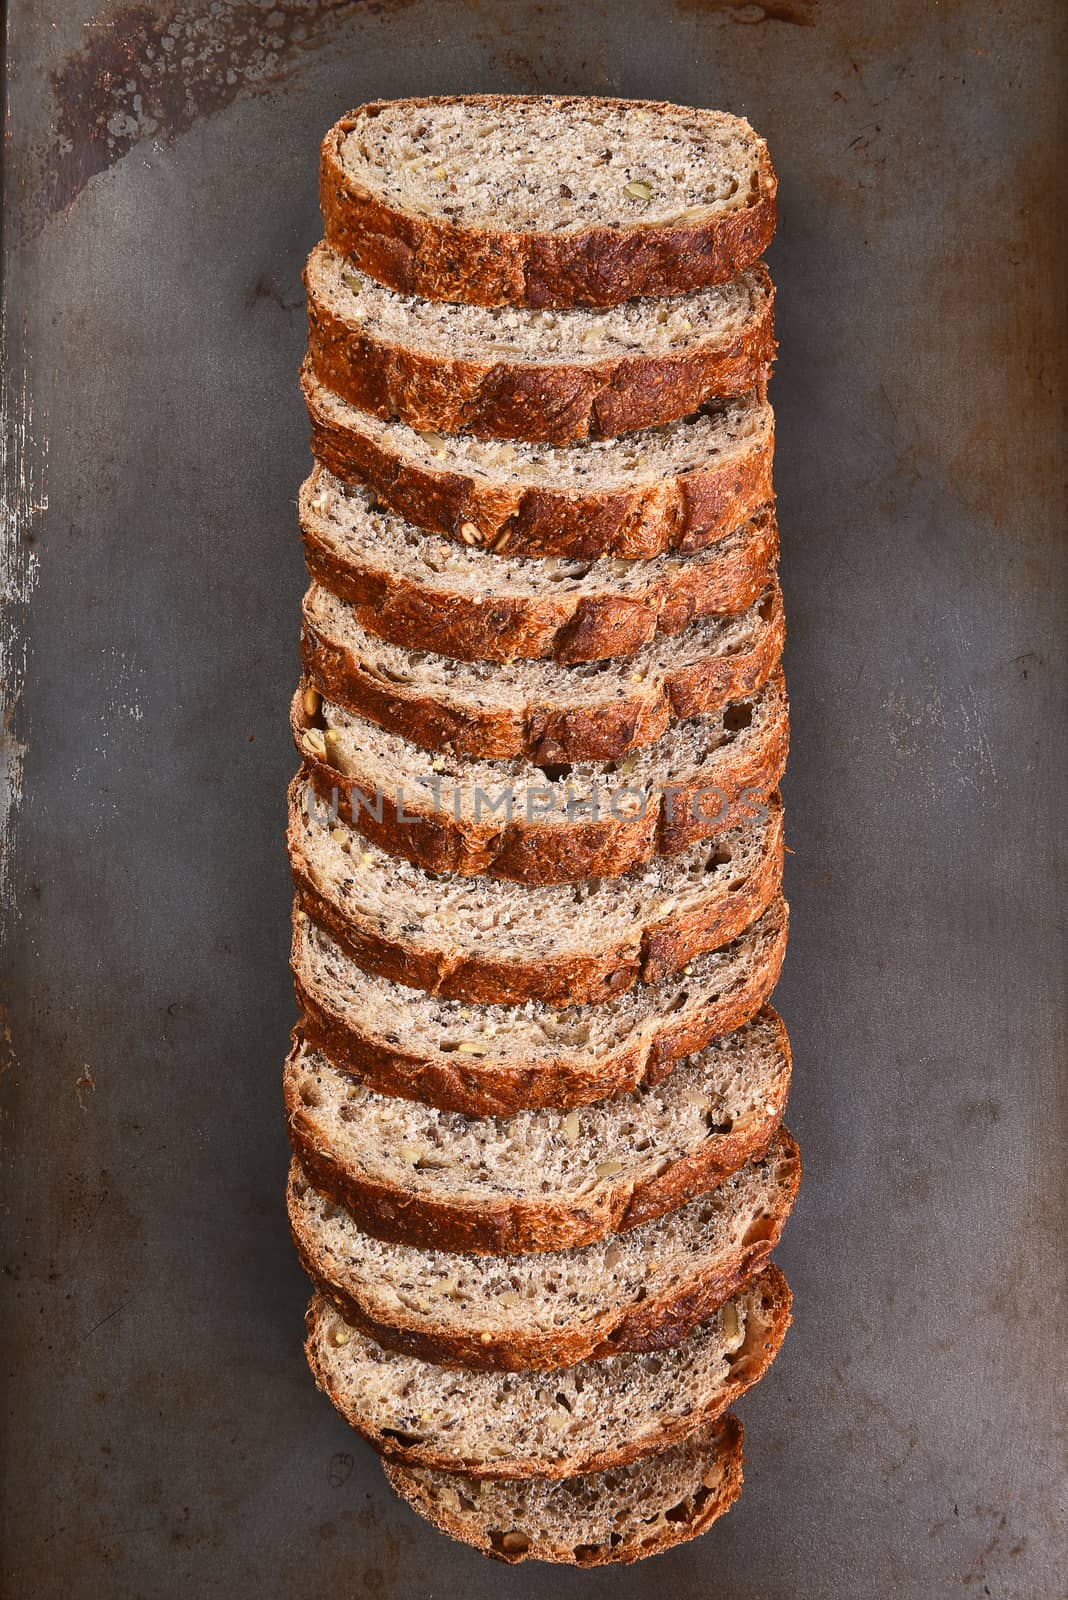 Top view of a sliced loaf of multi-grain bread on a baking sheet.